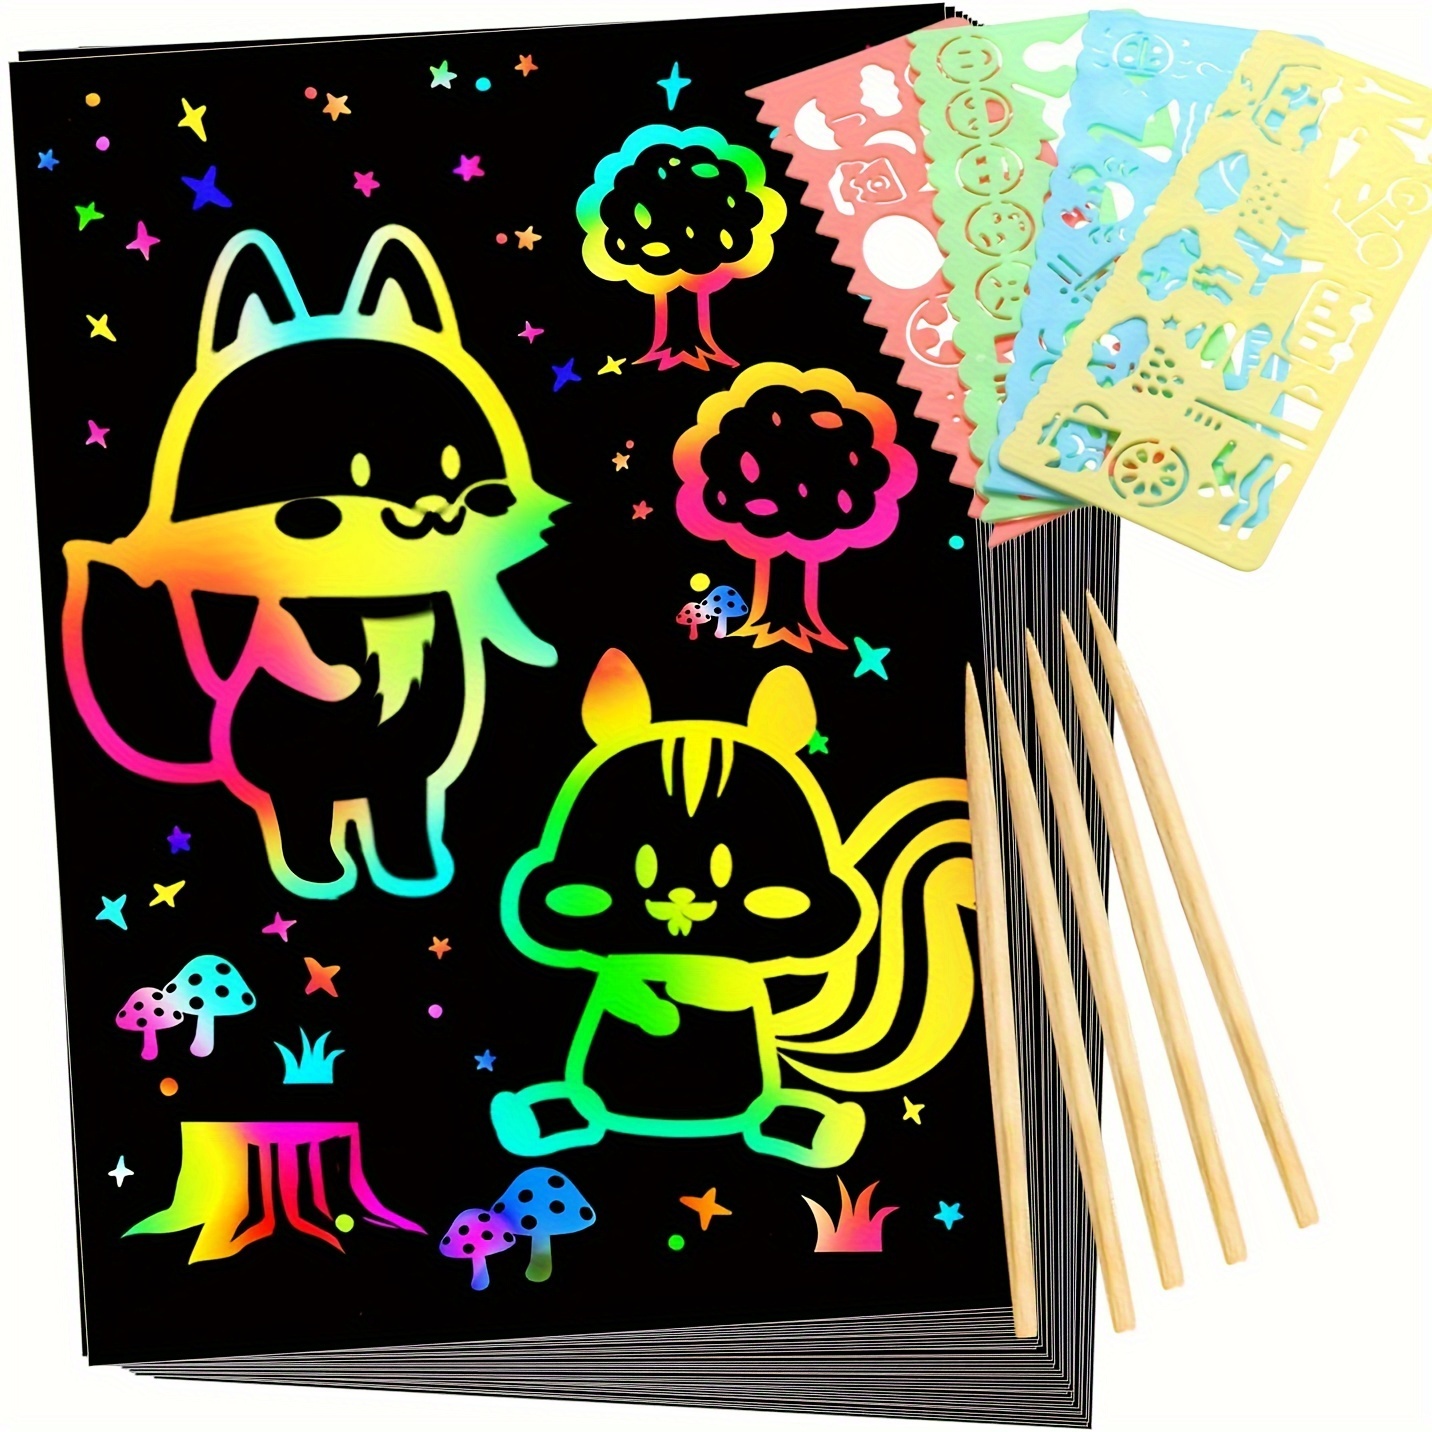 Cribun 50 Piece Rainbow Scratch Paper - 5 Wooden Styluses Included - Create  Rainbow Scratch with This Jumbo Craft Art Pack 